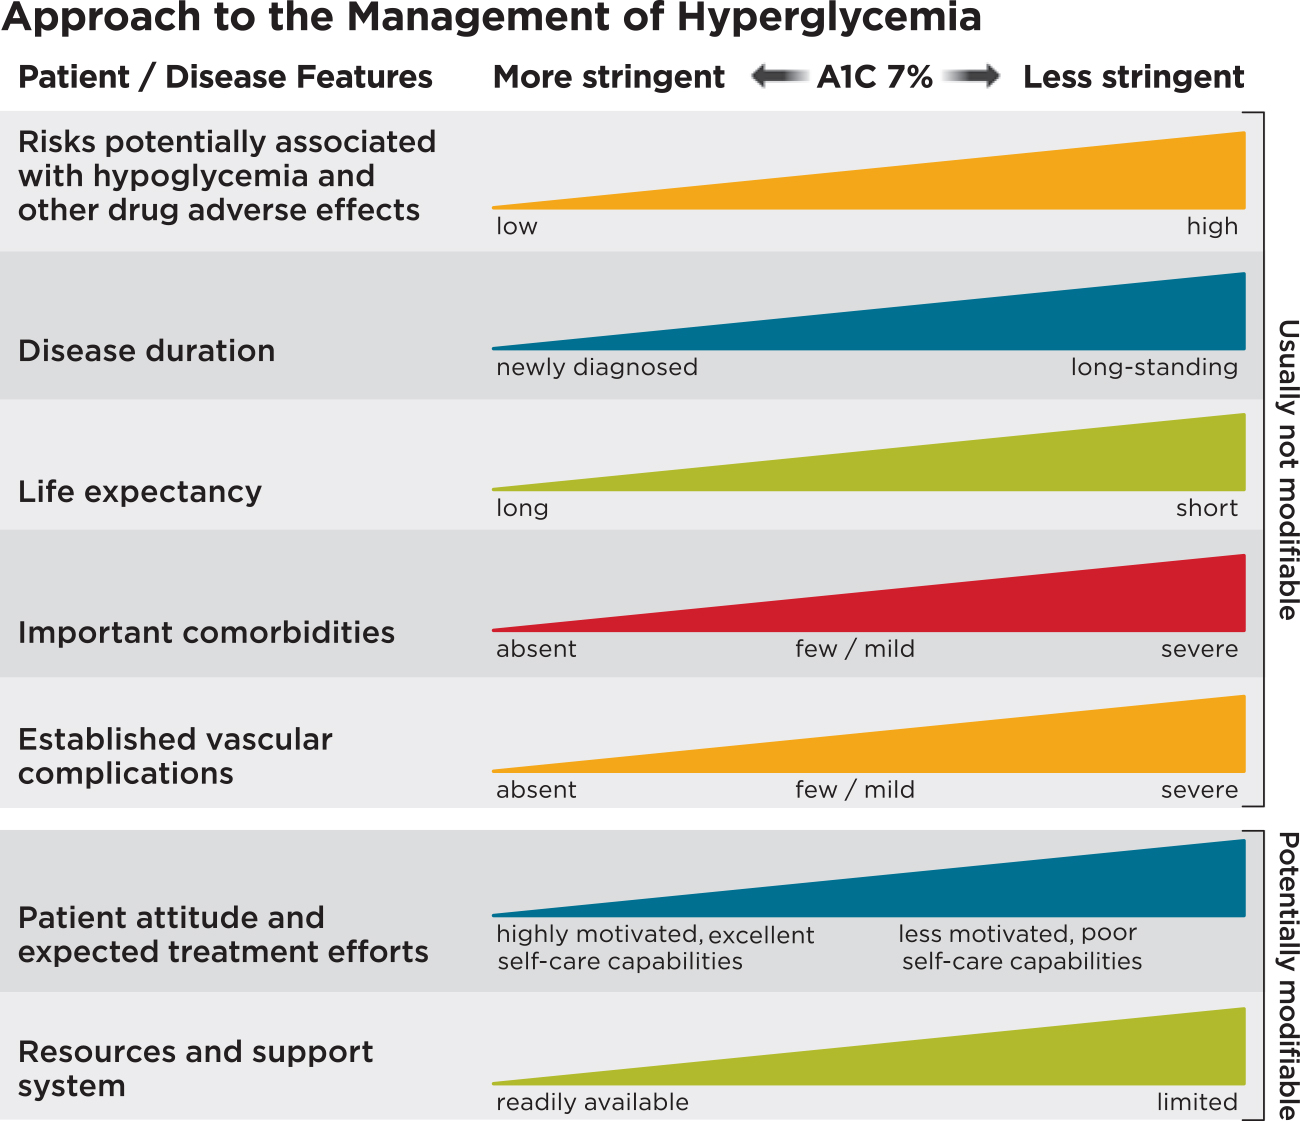 Approach to the Management of Hyperglycemia